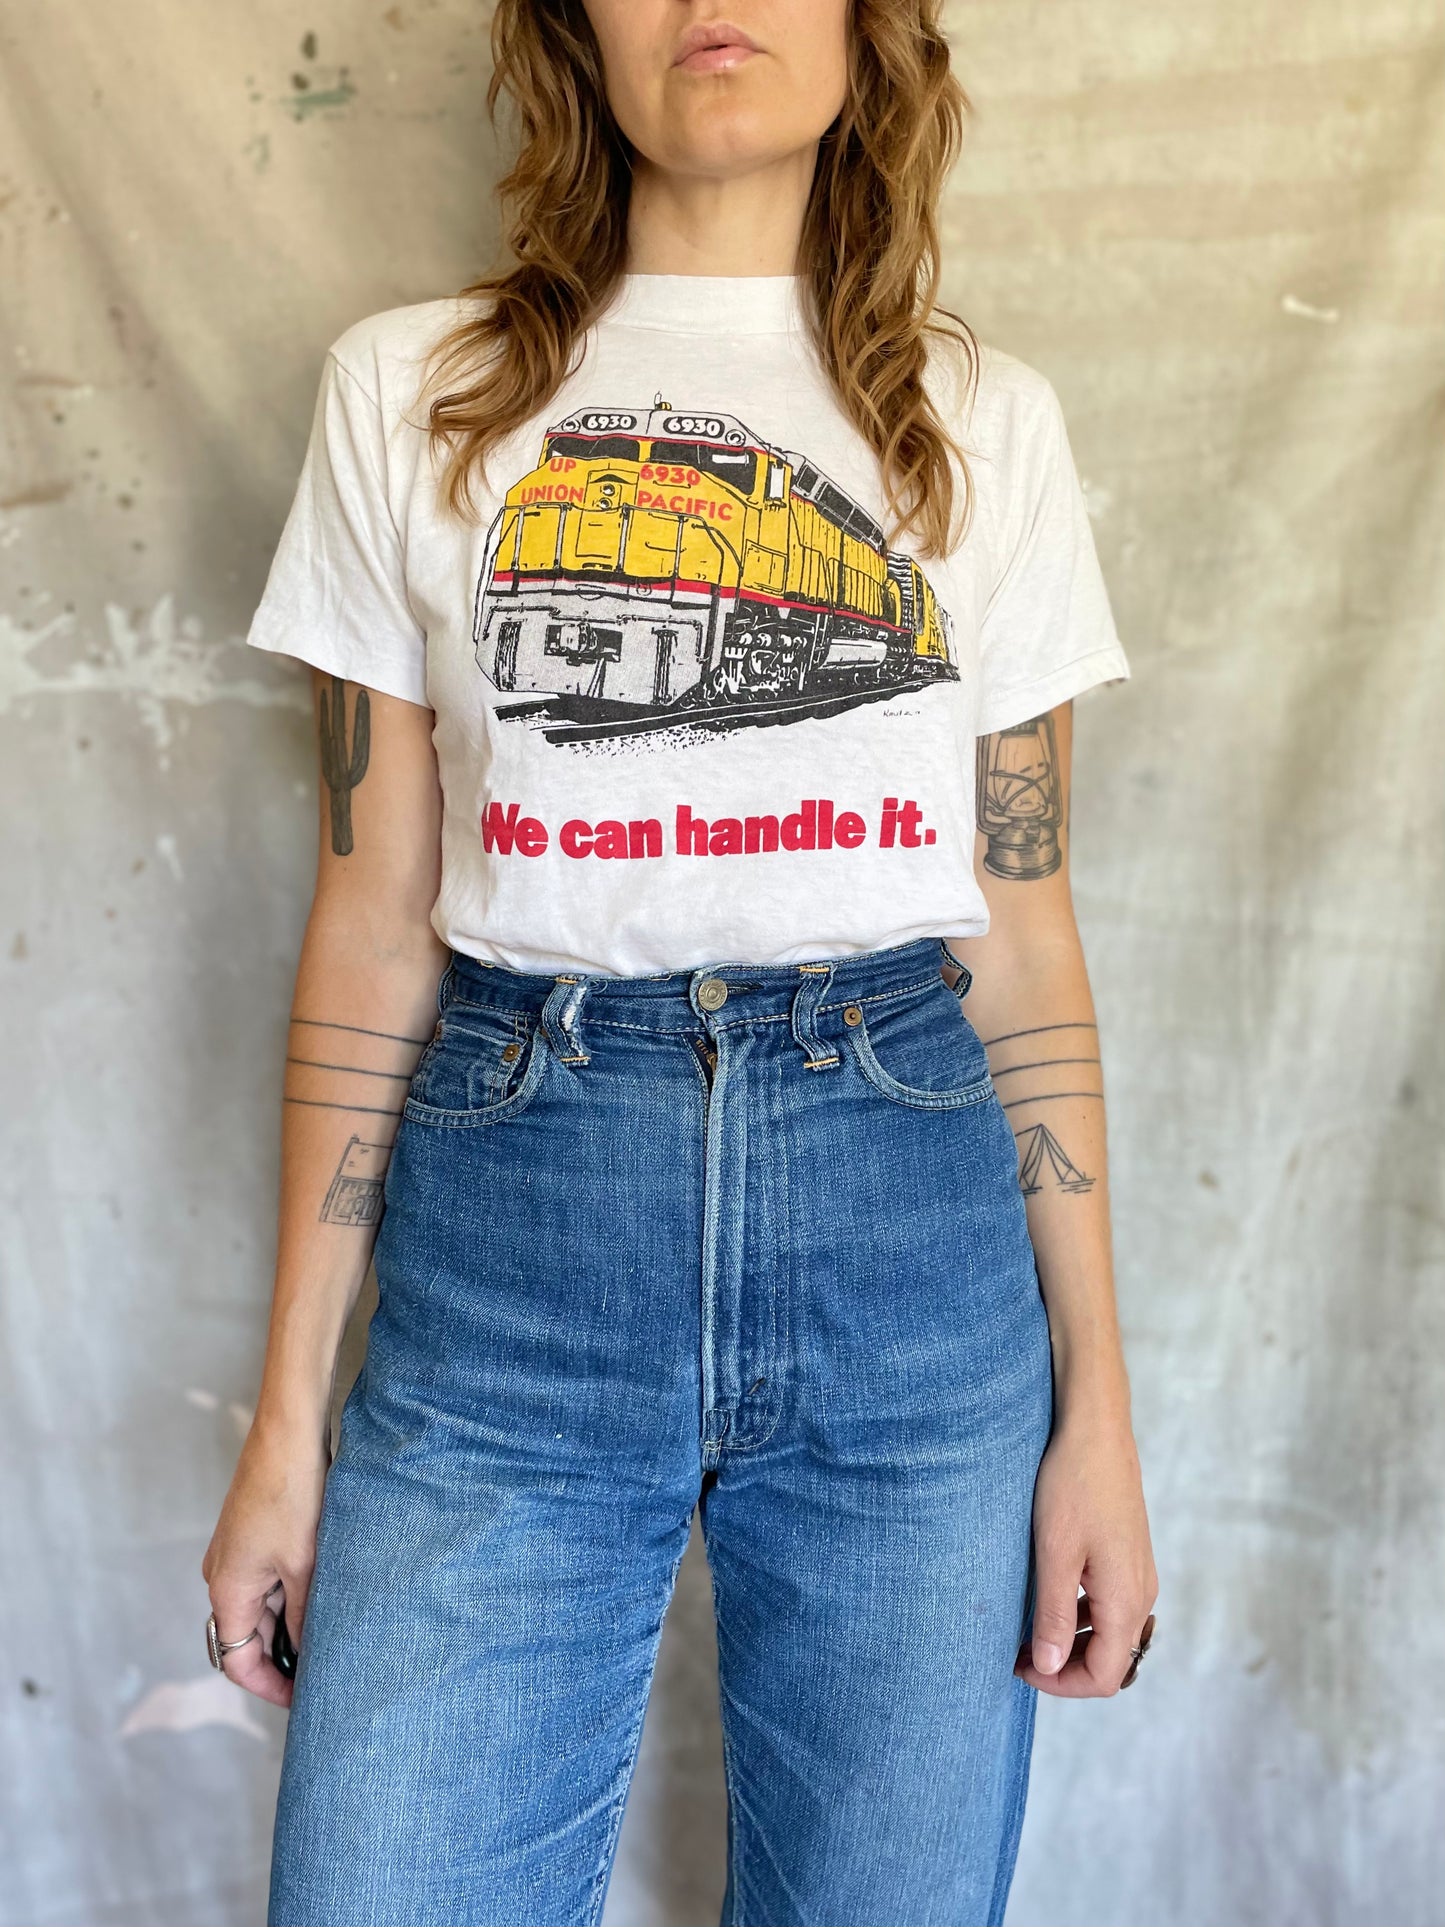 70s Union Pacific “We Can Handle It” Tee